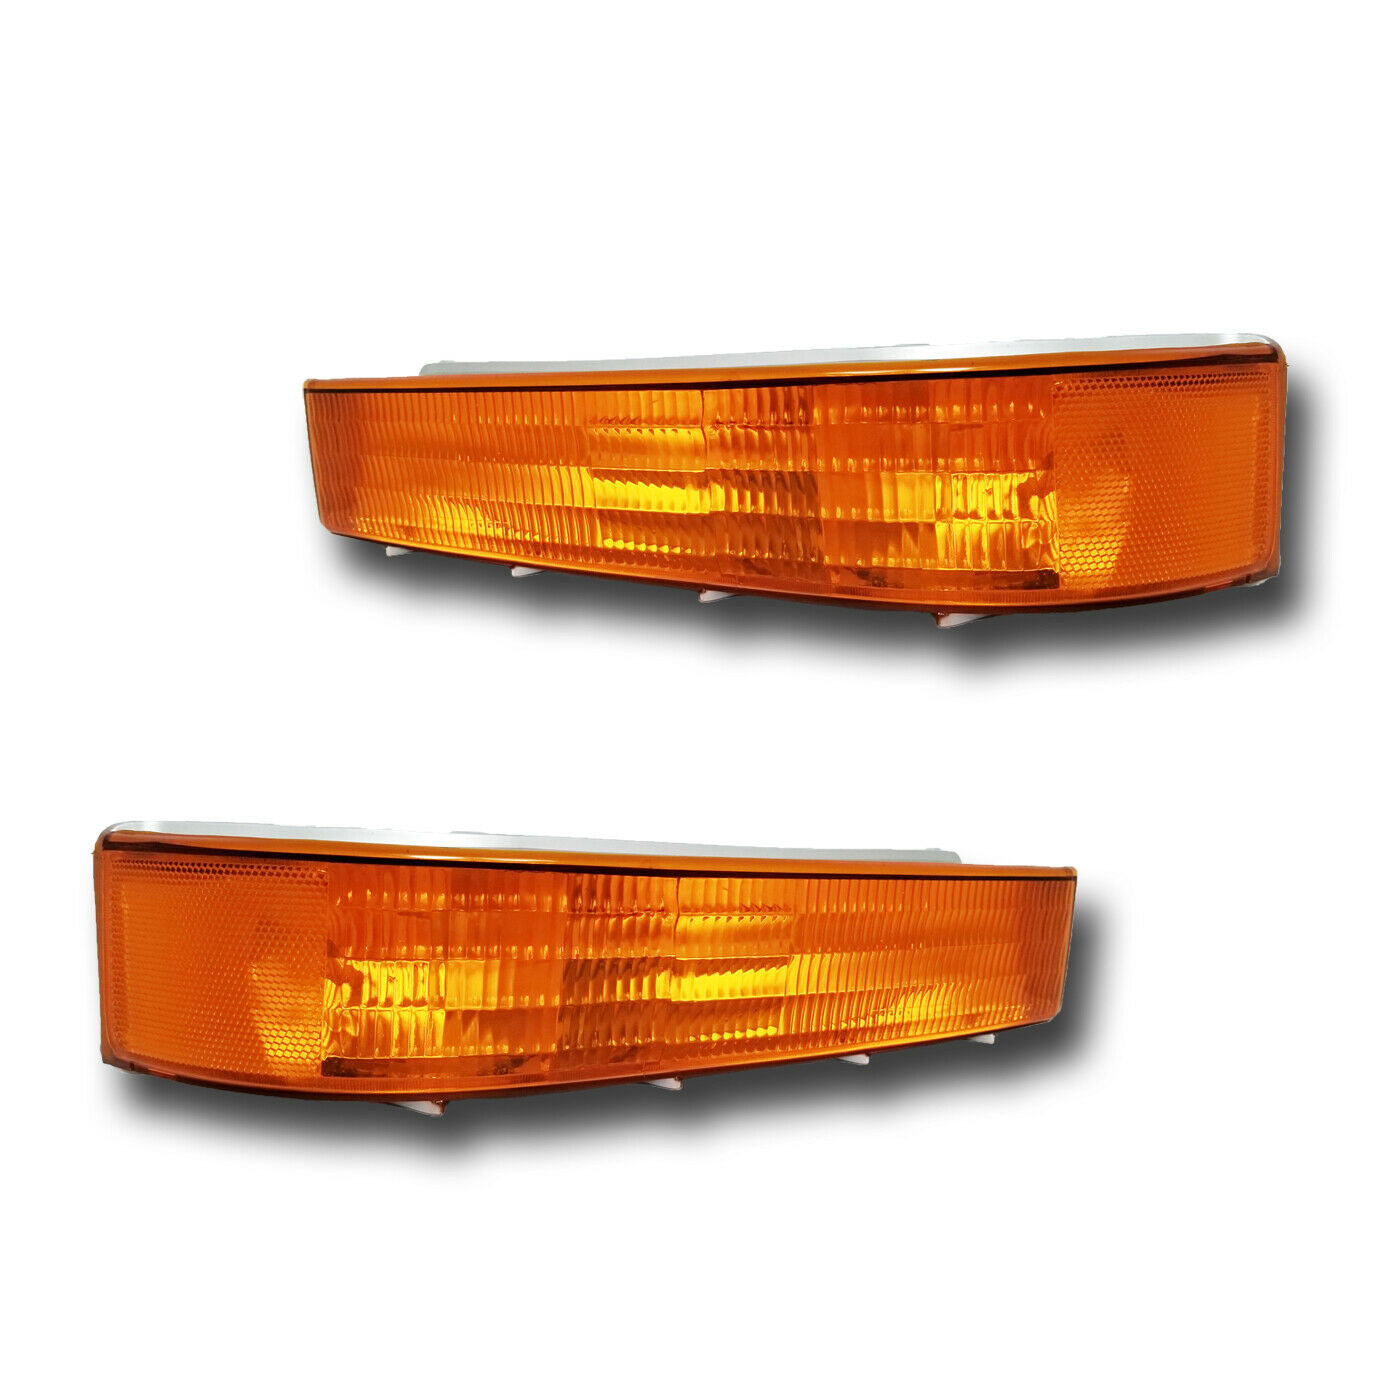 National RV Sea View Turn Signal Lamps Unit Pair (Left & Right)